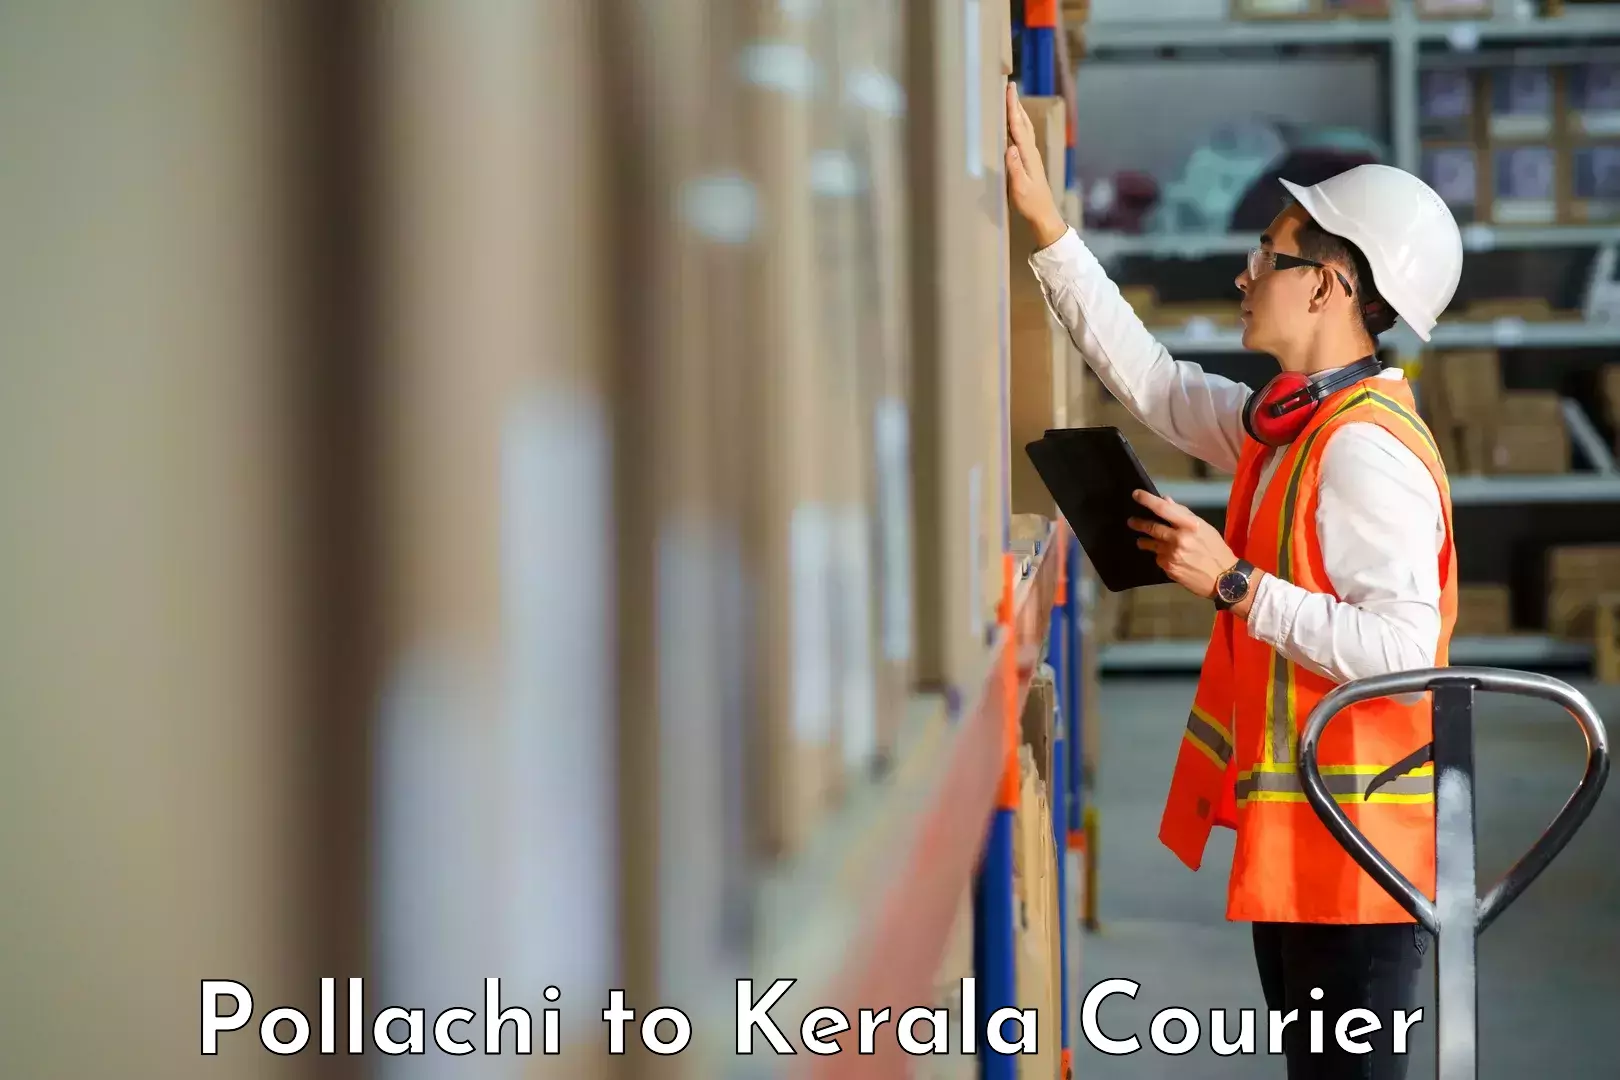 Urban courier service Pollachi to Mahe